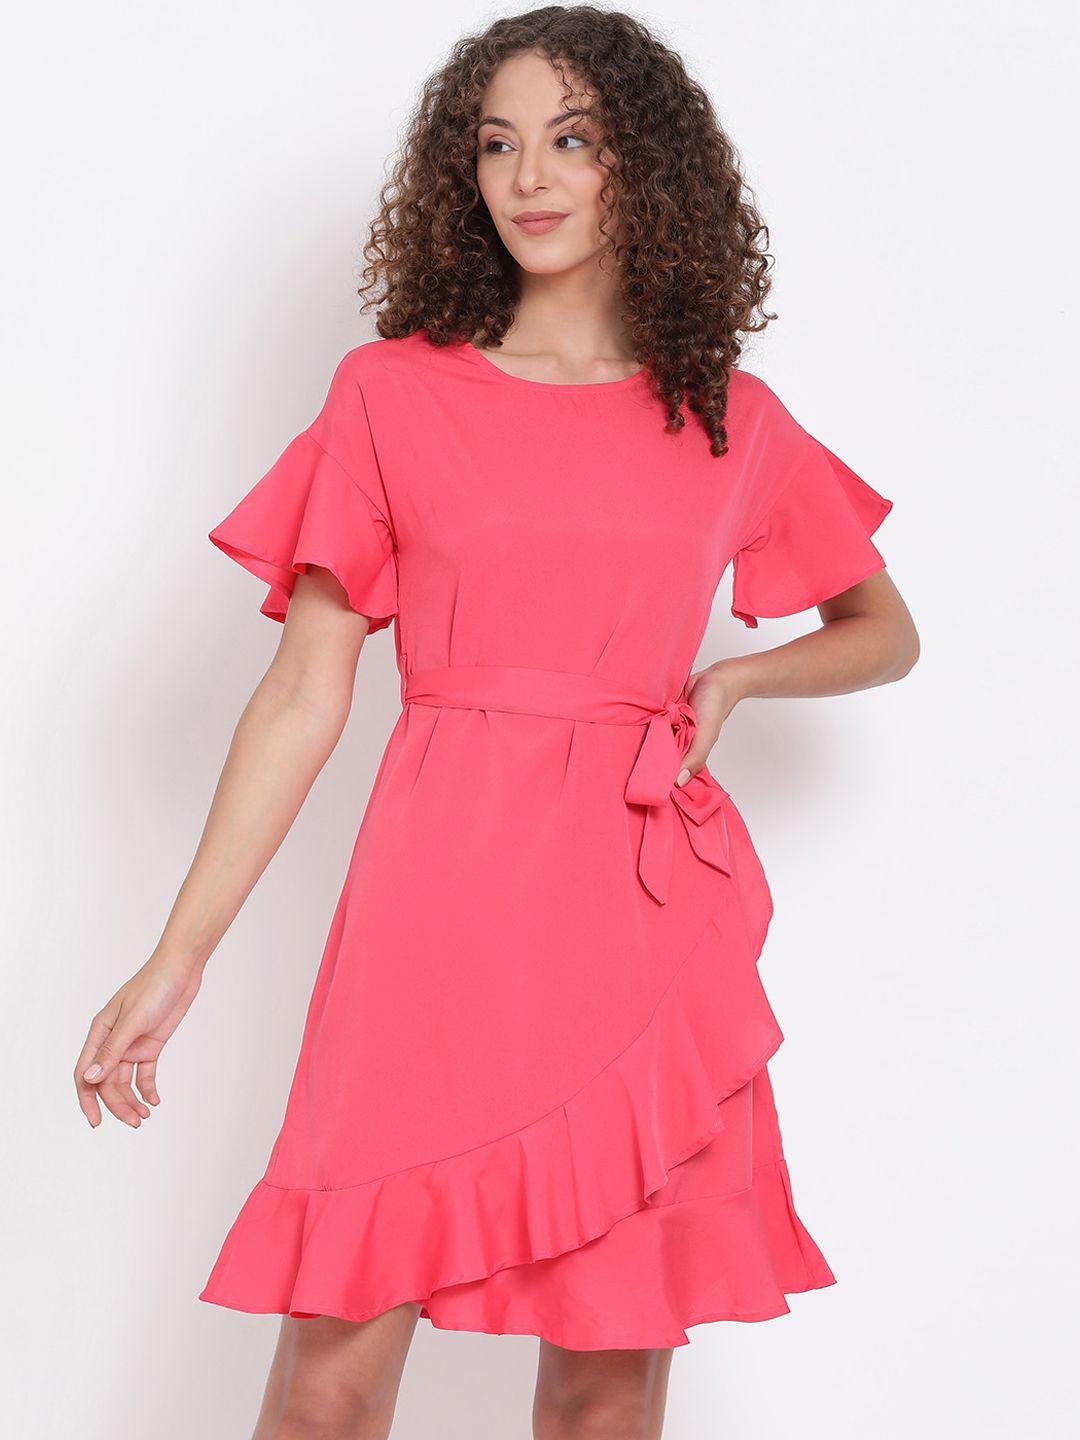 oxolloxo-women-pink-solid-a-line-dress